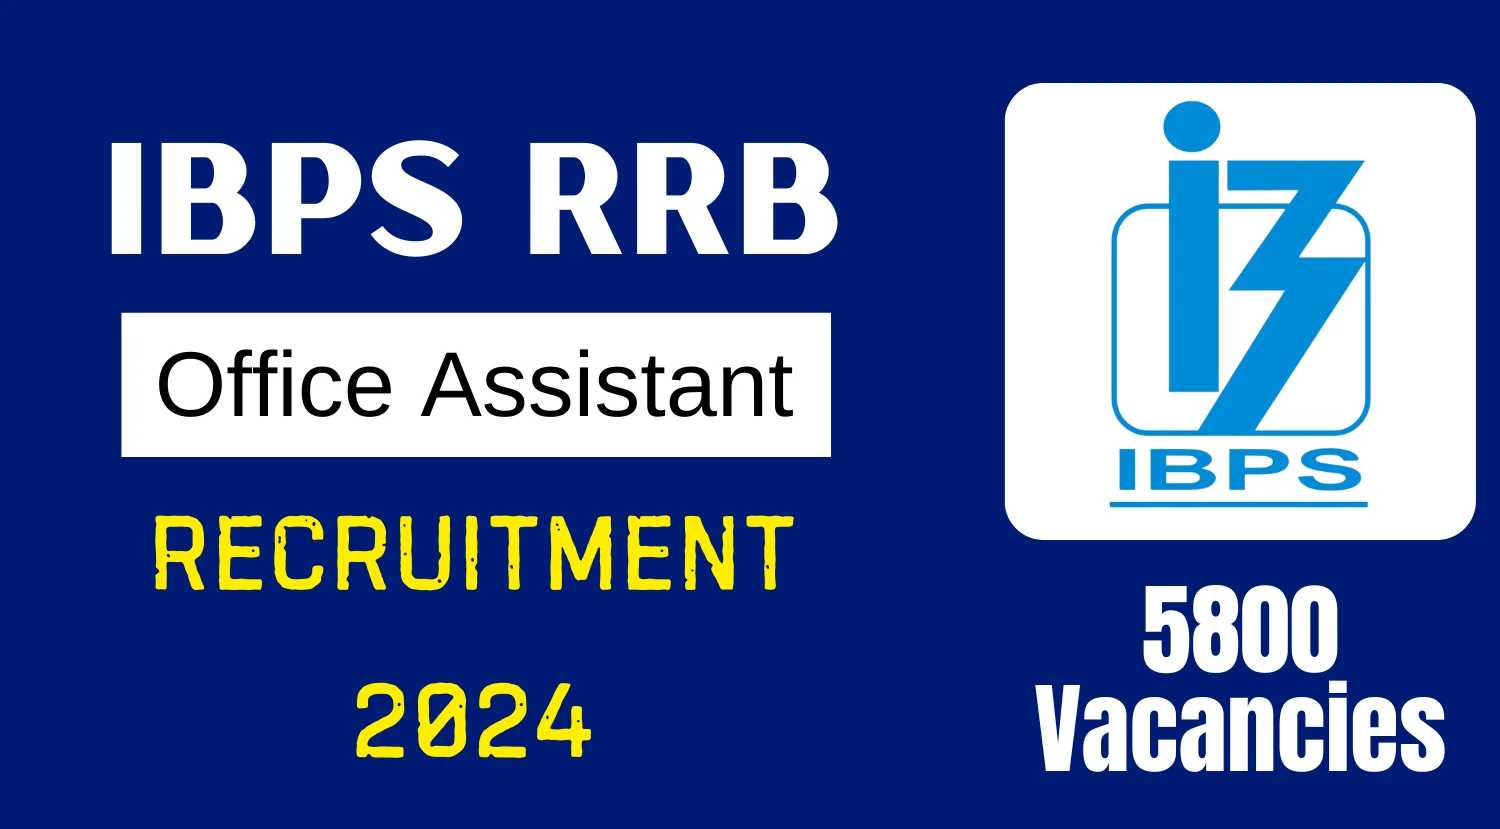 IBPS RRB Office Assistant Recruitment 2024